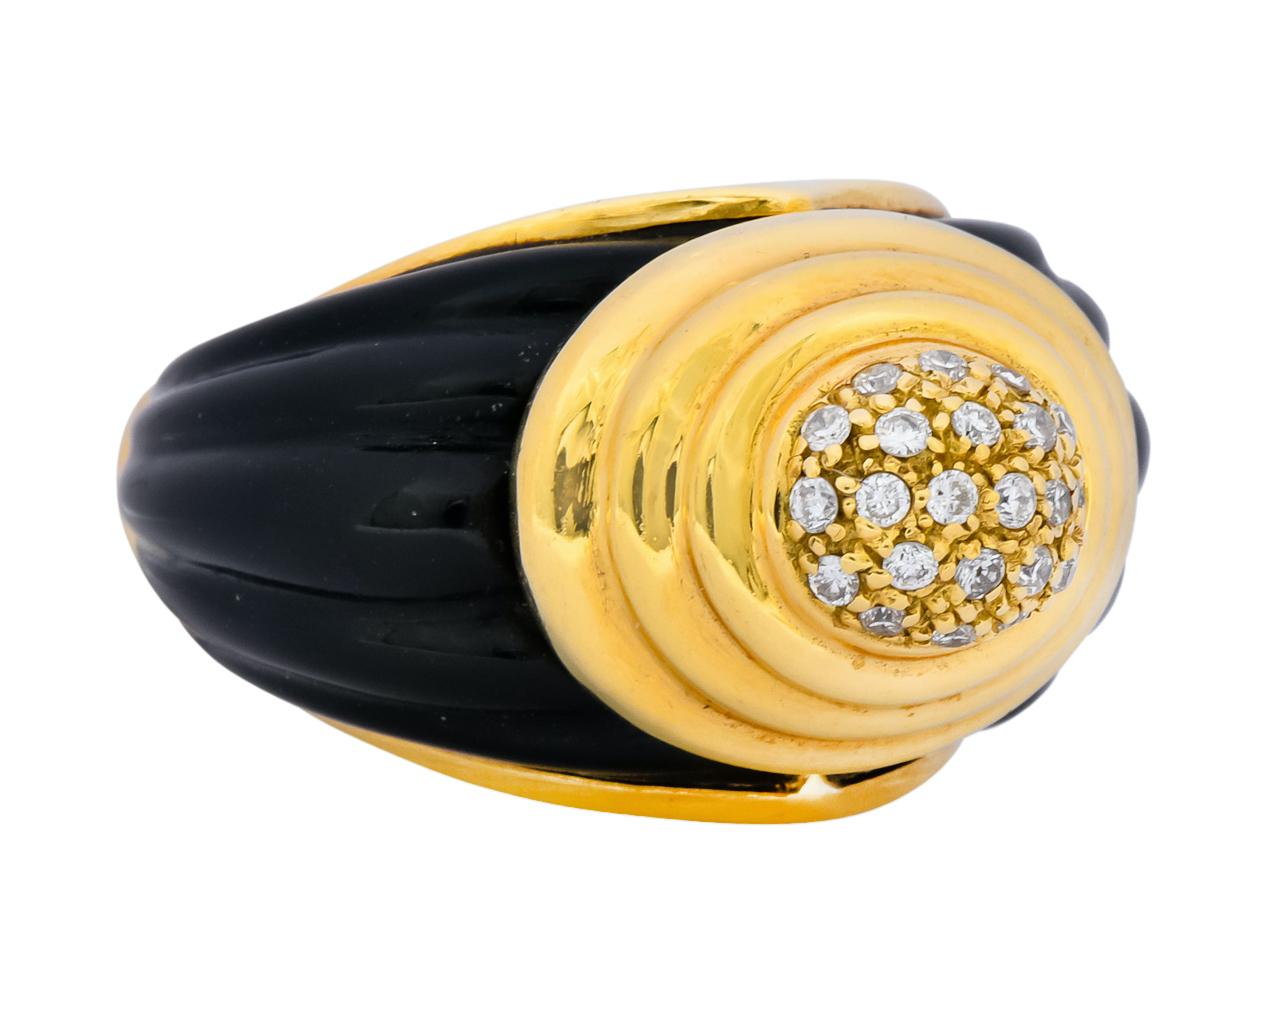 Centering a round oval pavé field set with round brilliant cut diamonds weighing approximately 0.18 carat, eye-clean and white

With a graduating ridged gold surround

Flanked by carved fluted black onyx shoulders

Inner shank features black